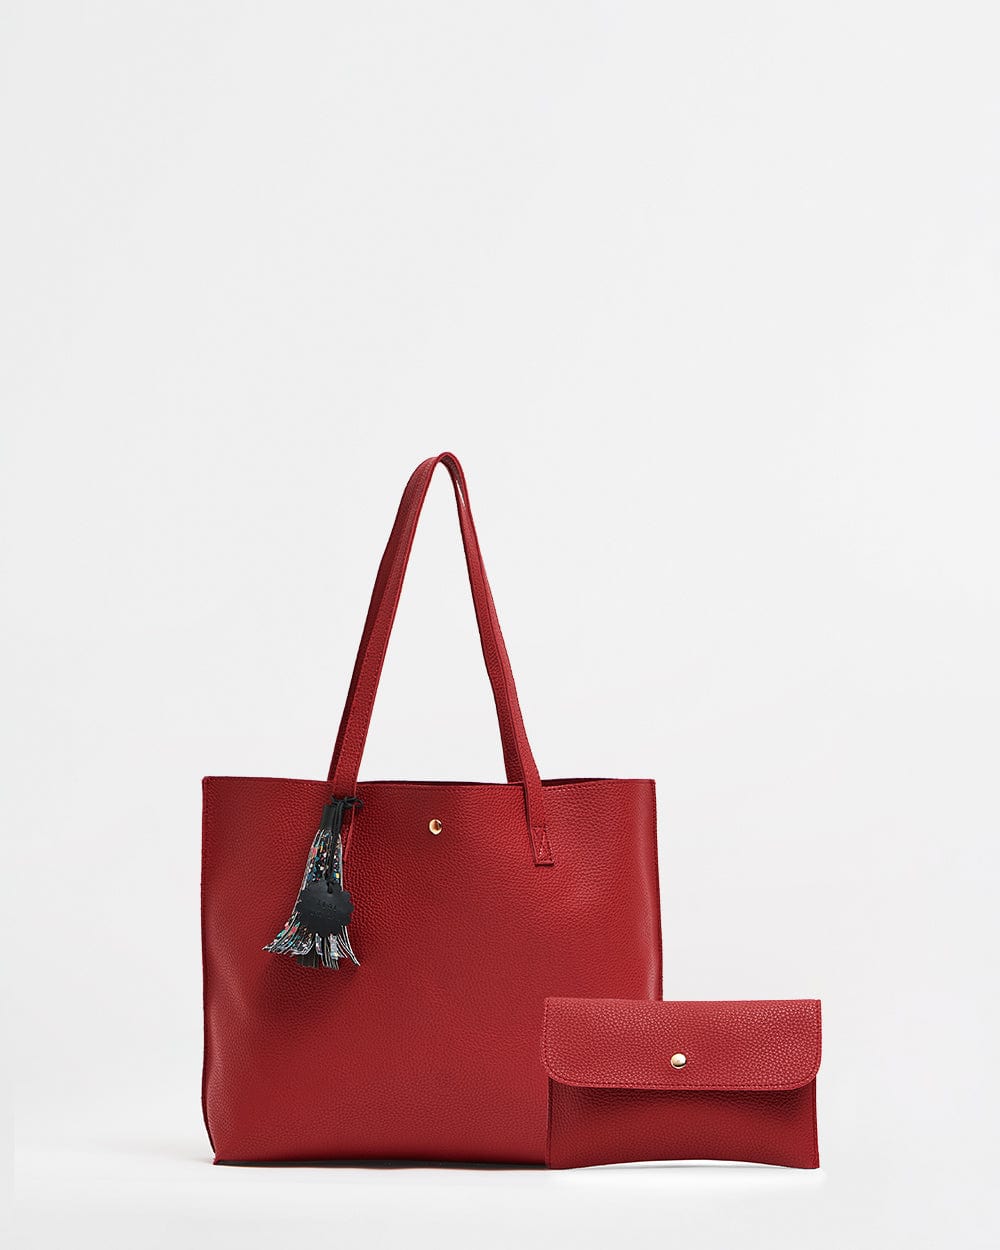 Back To Office Tote -Rosewood Maroon - Chumbak